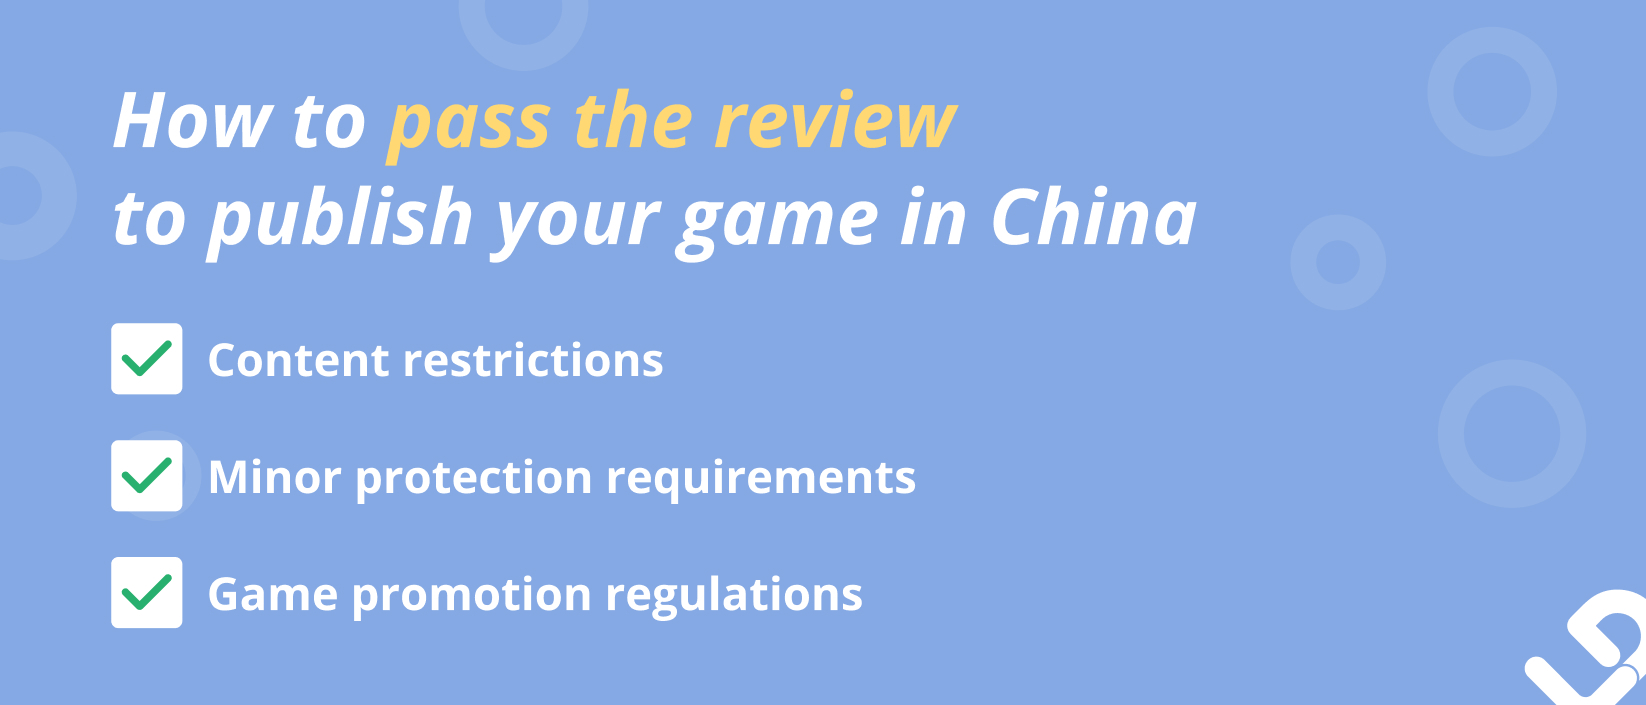 Guide to pass the review to publish your game in China